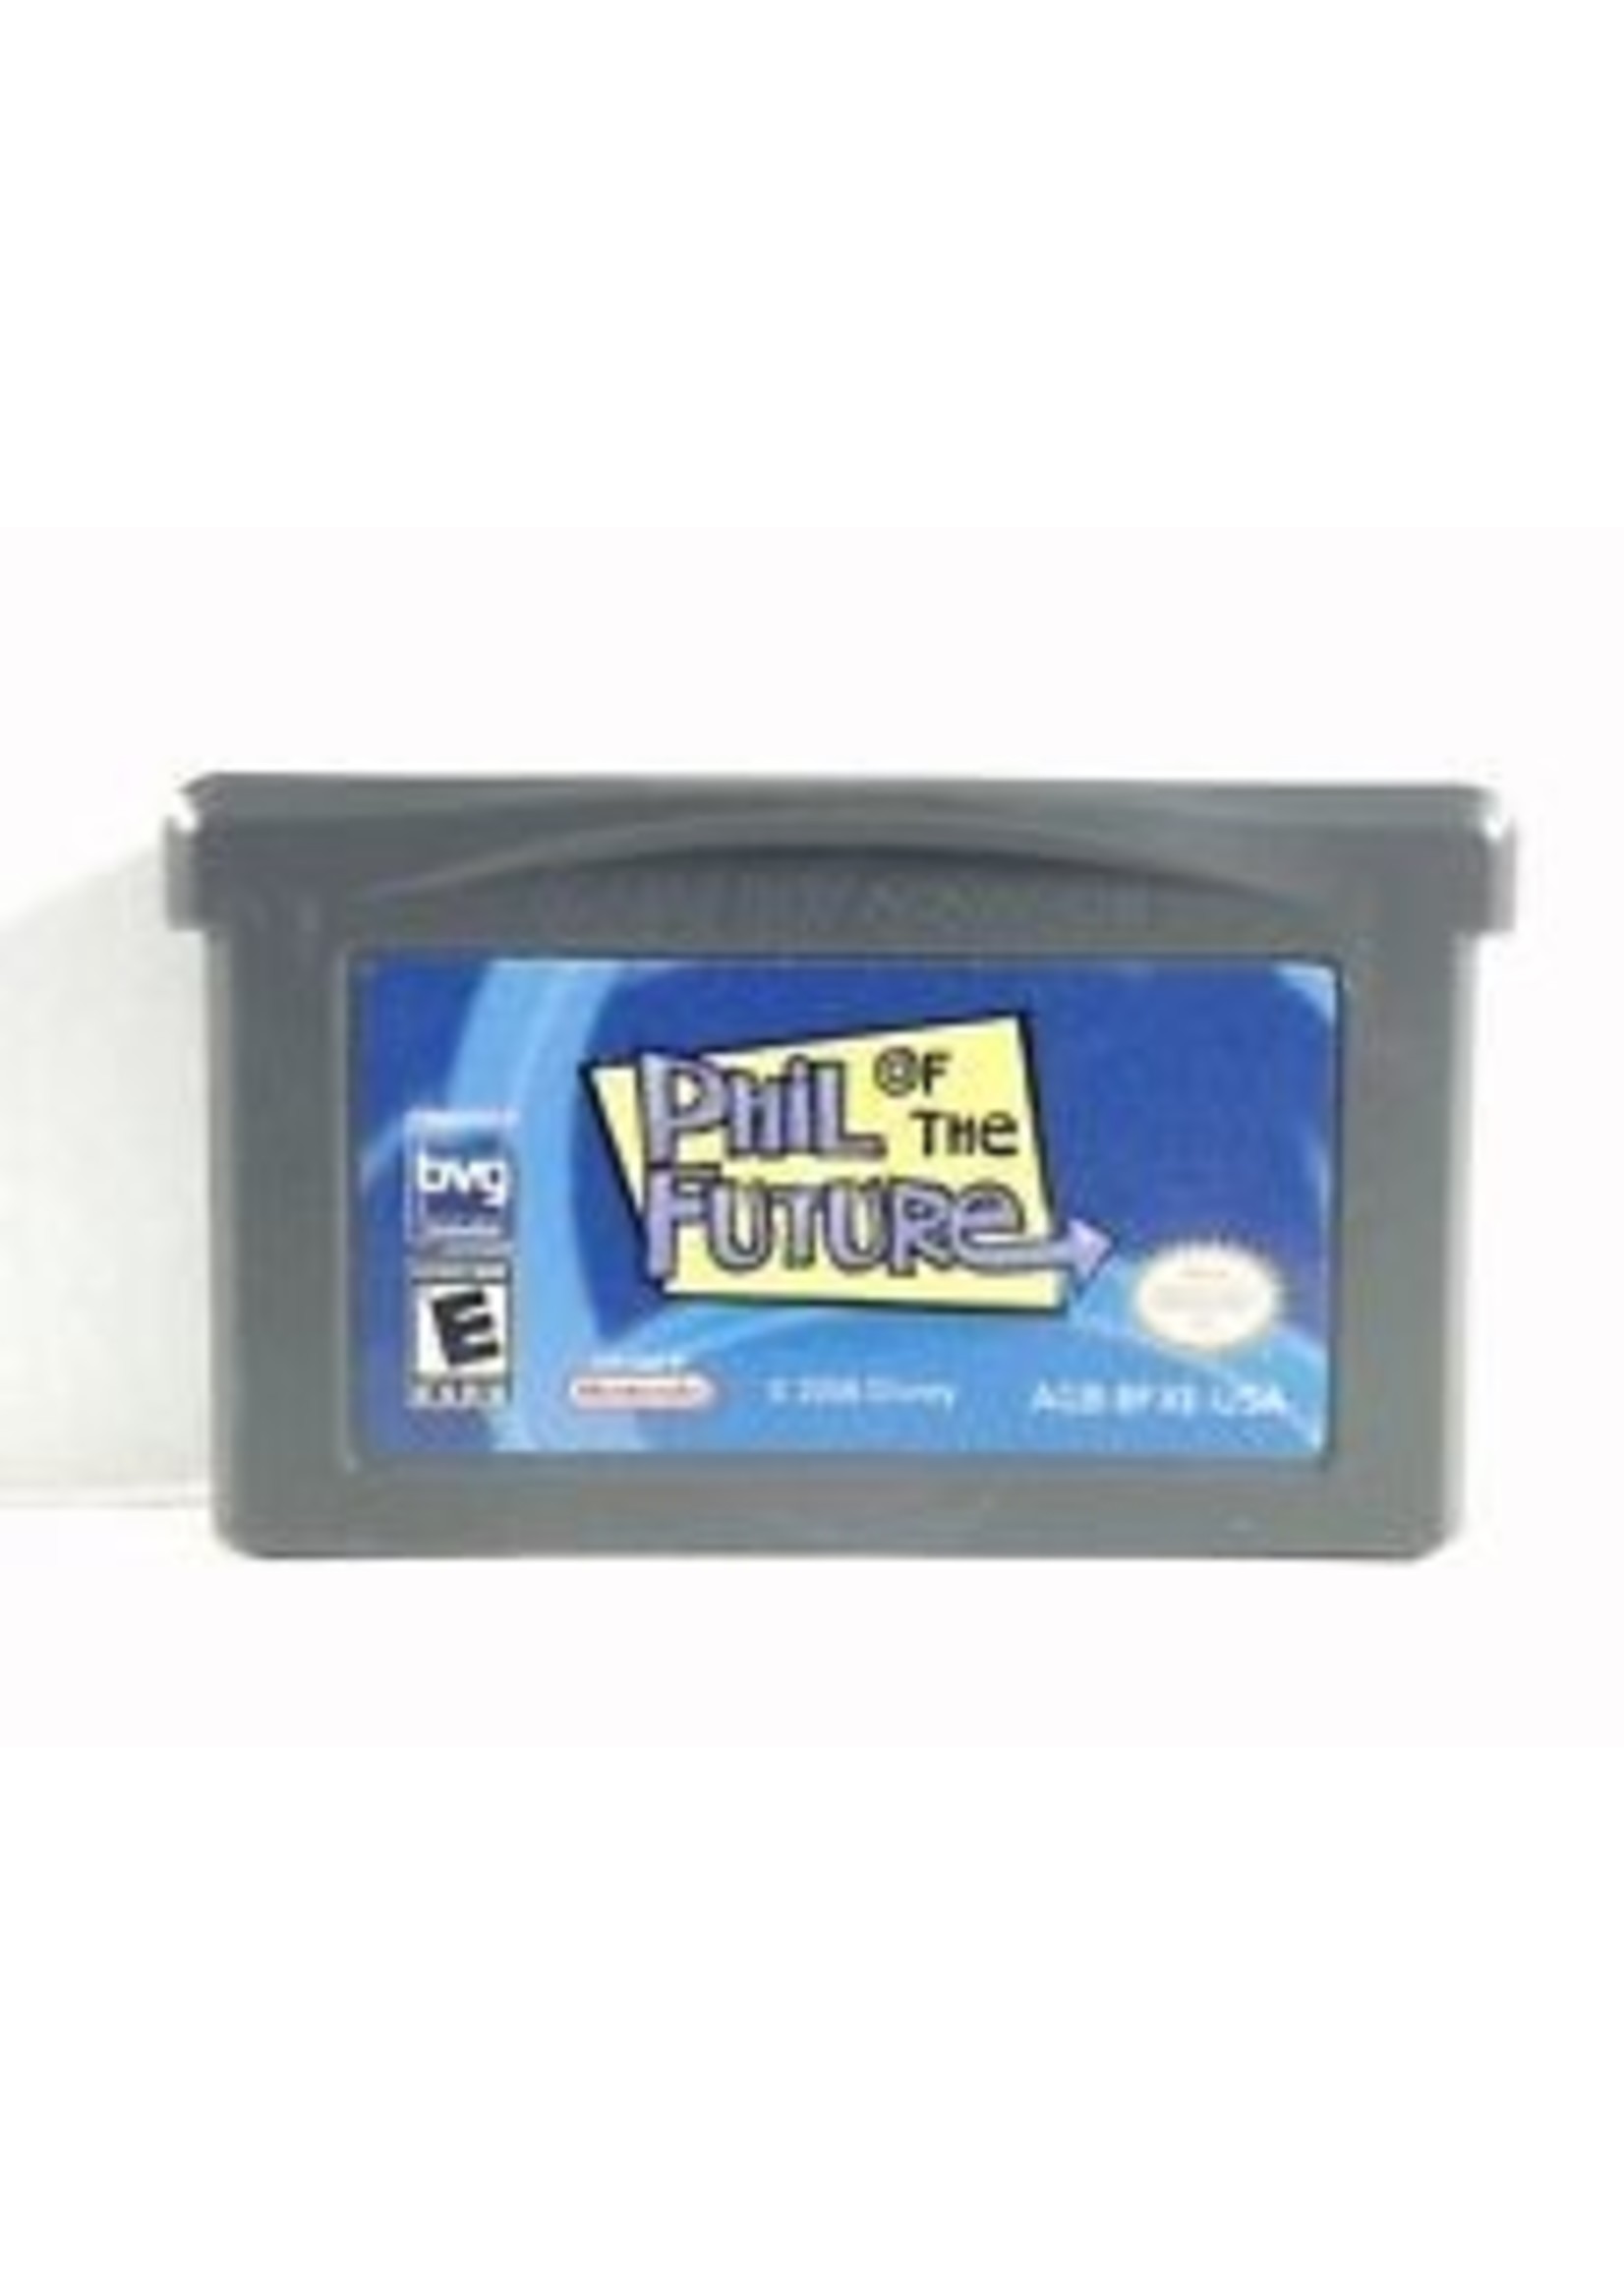 Nintendo Gameboy Advance Phil of the Future